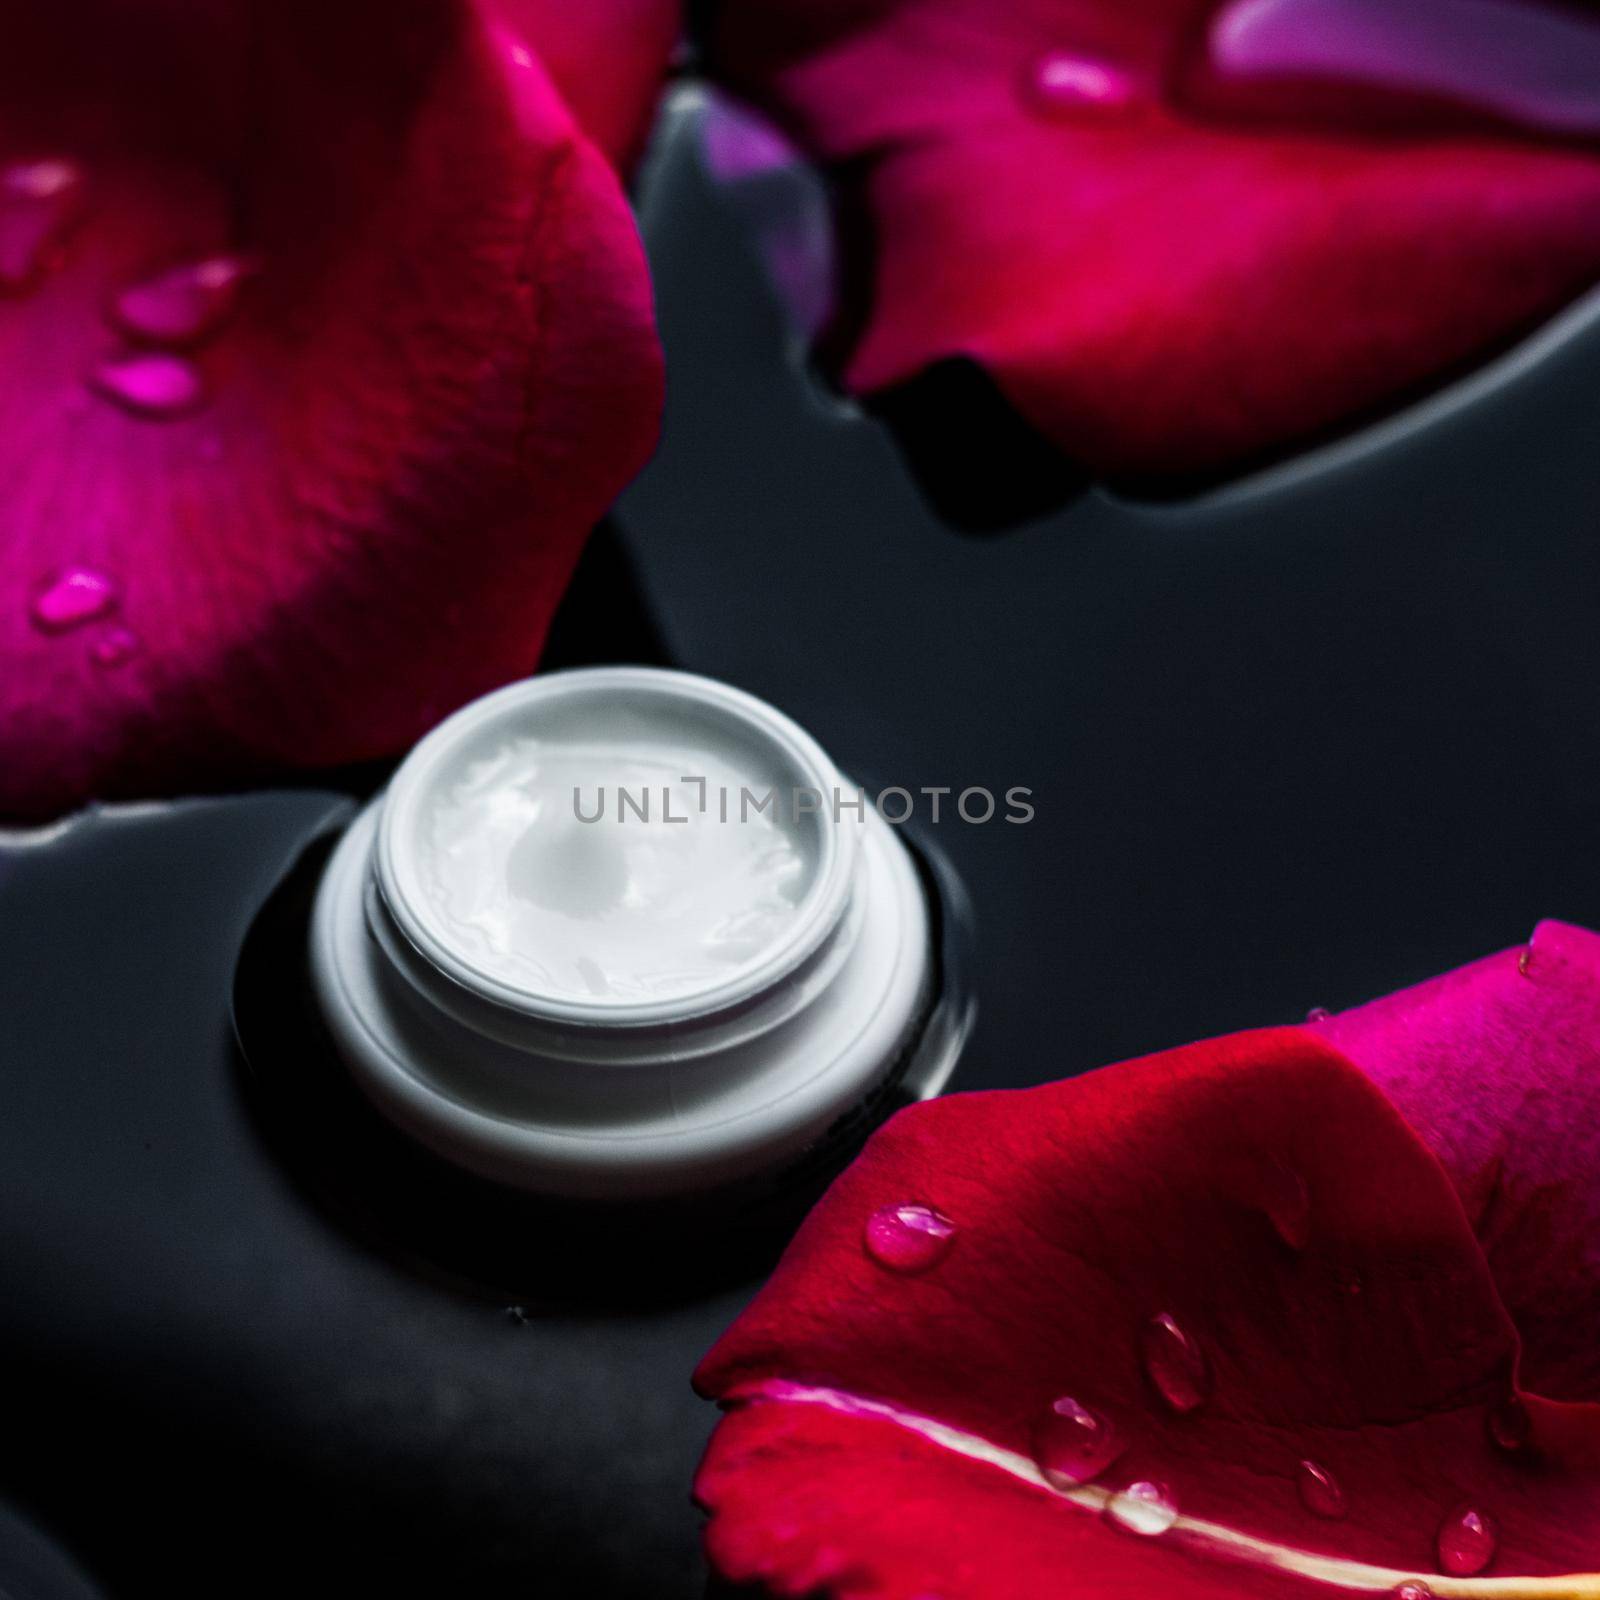 beauty cream jar and flower petals - cosmetics with flowers styled concept, elegant visuals